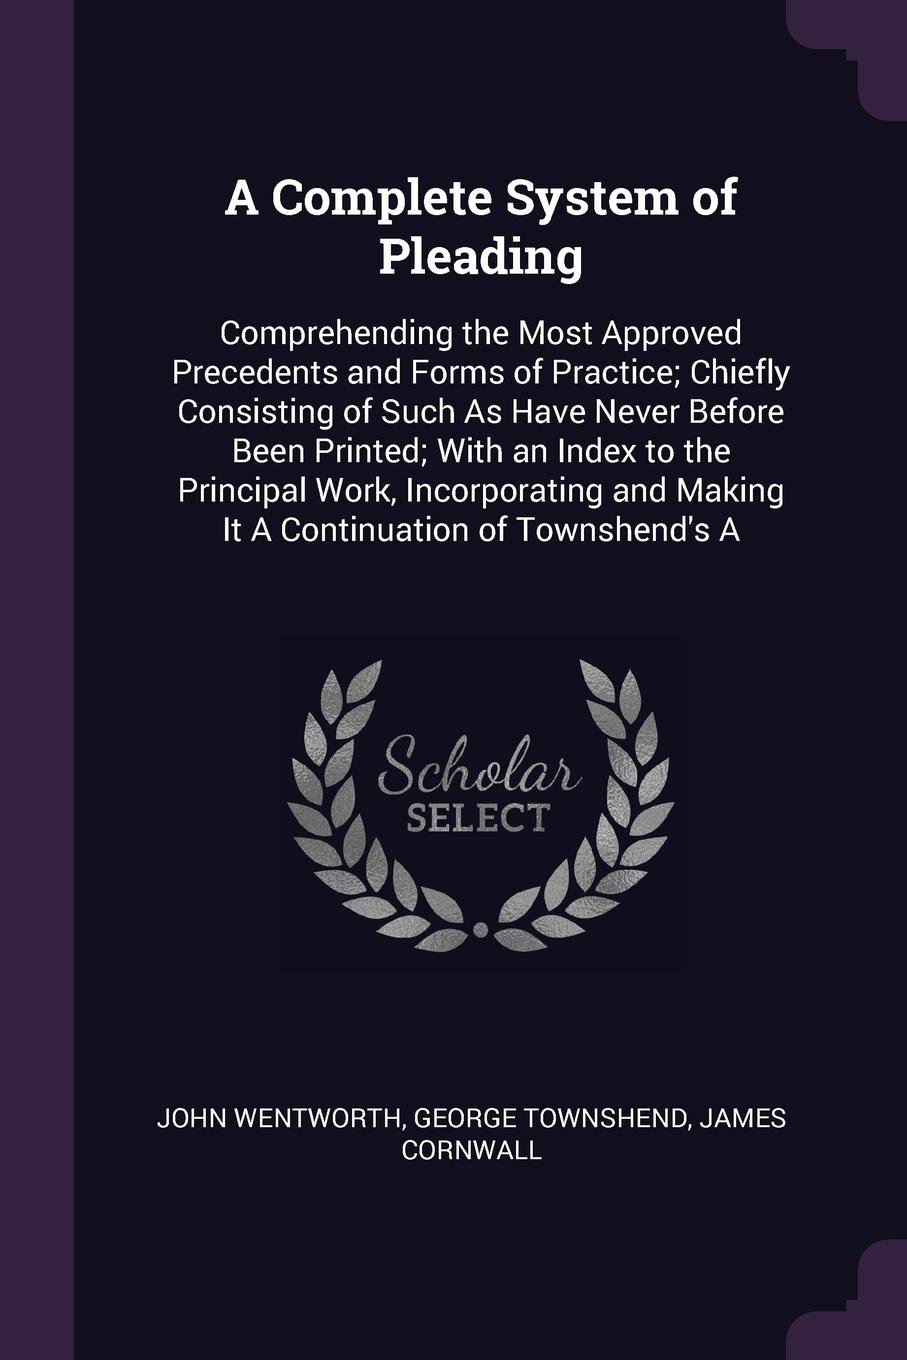 A Complete System of Pleading. Comprehending the Most Approved Precedents and Forms of Practice; Chiefly Consisting of Such As Have Never Before Been Printed; With an Index to the Principal Work, Incorporating and Making It A Continuation of Towns...